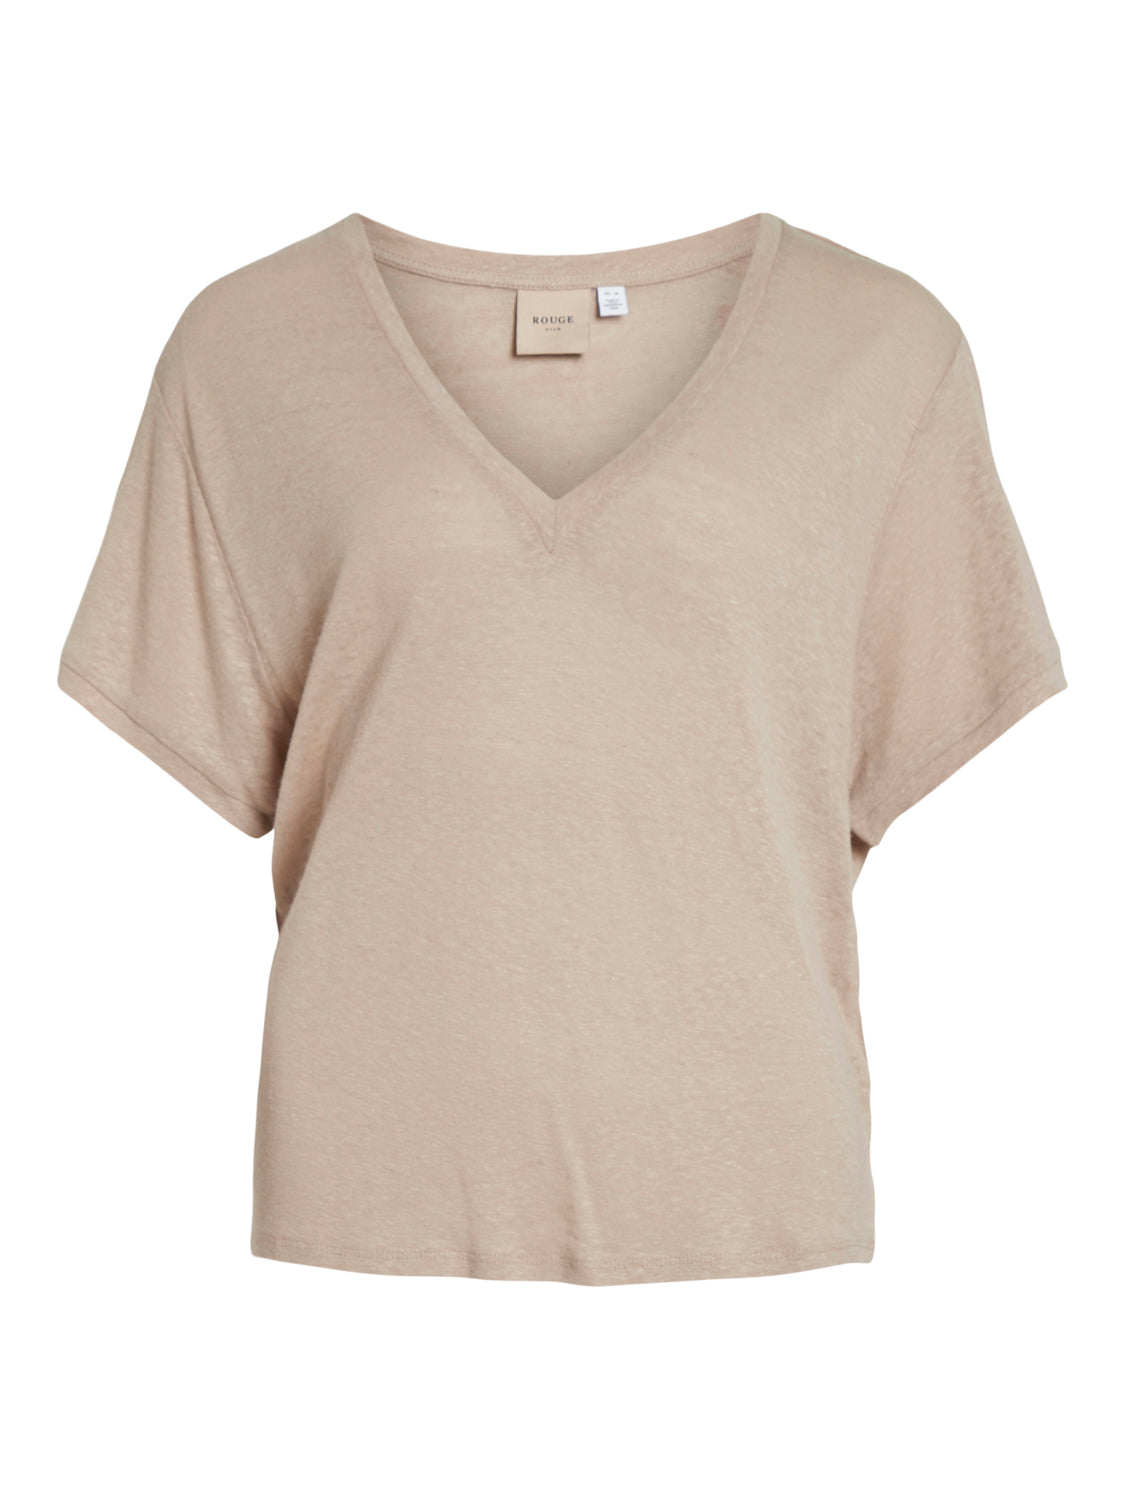 VIHOLLY T-Shirt - Simply Taupe